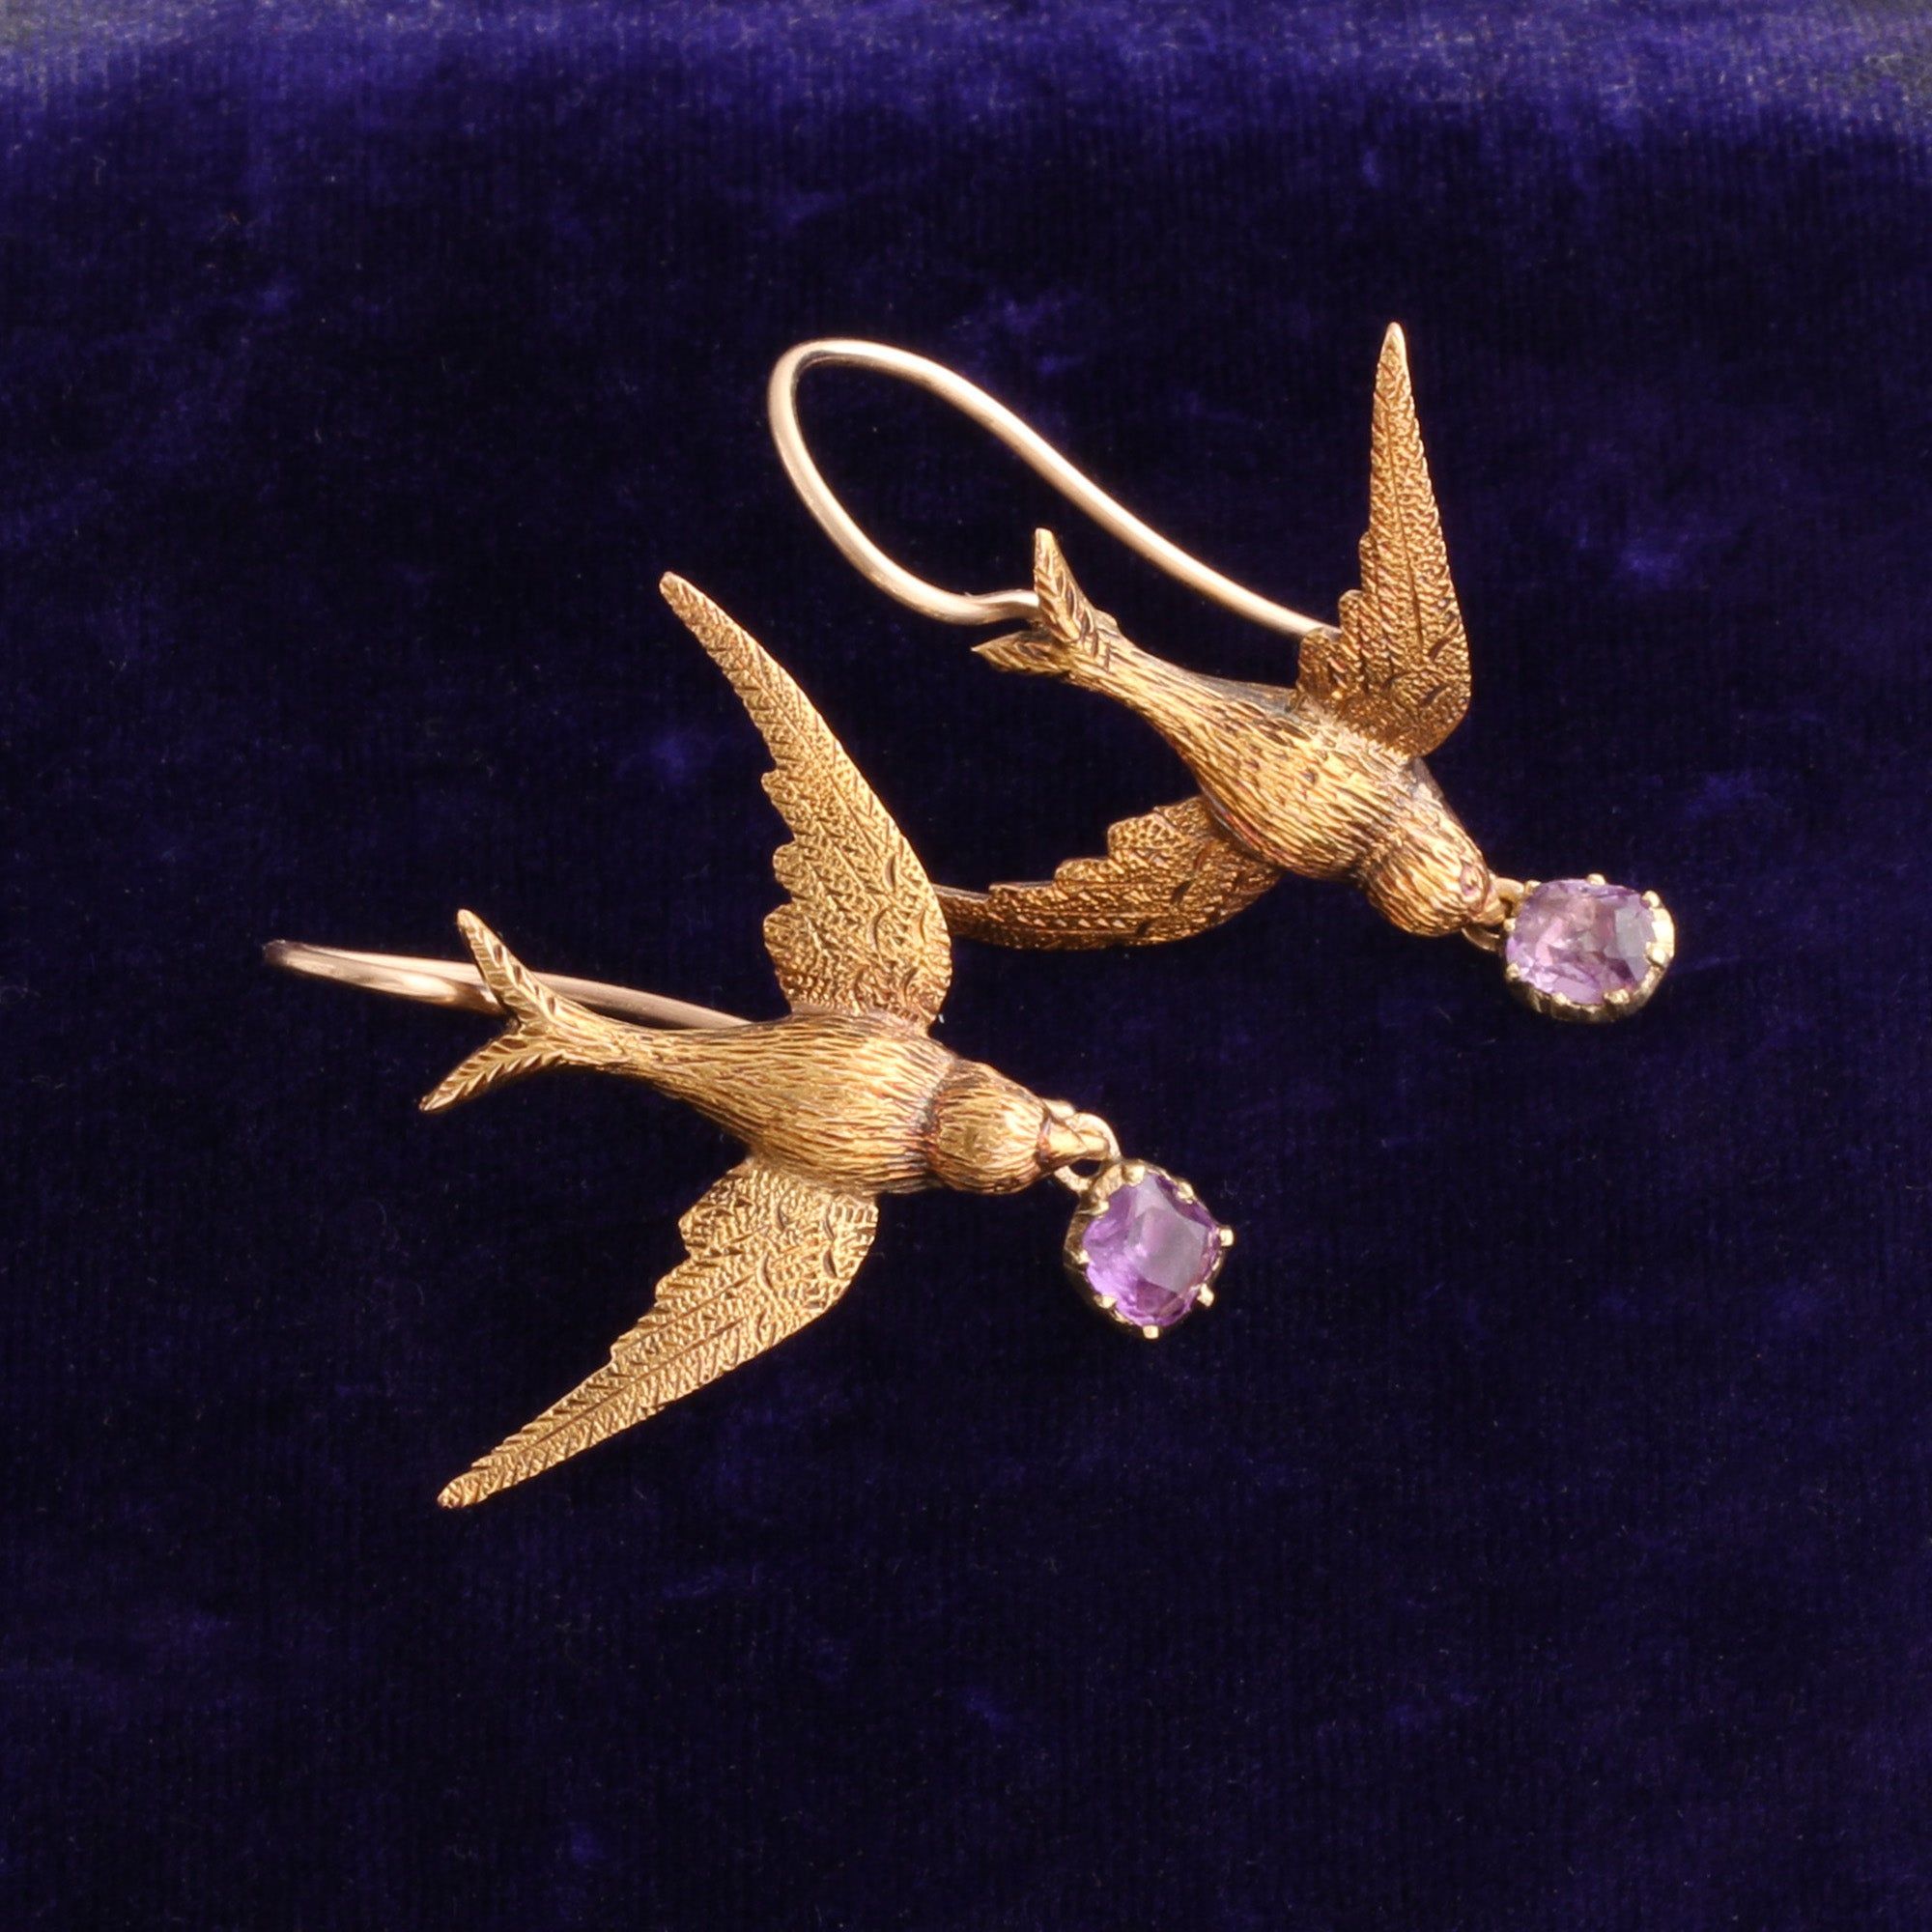 Victorian Swallow Earrings with Pendant Amethysts